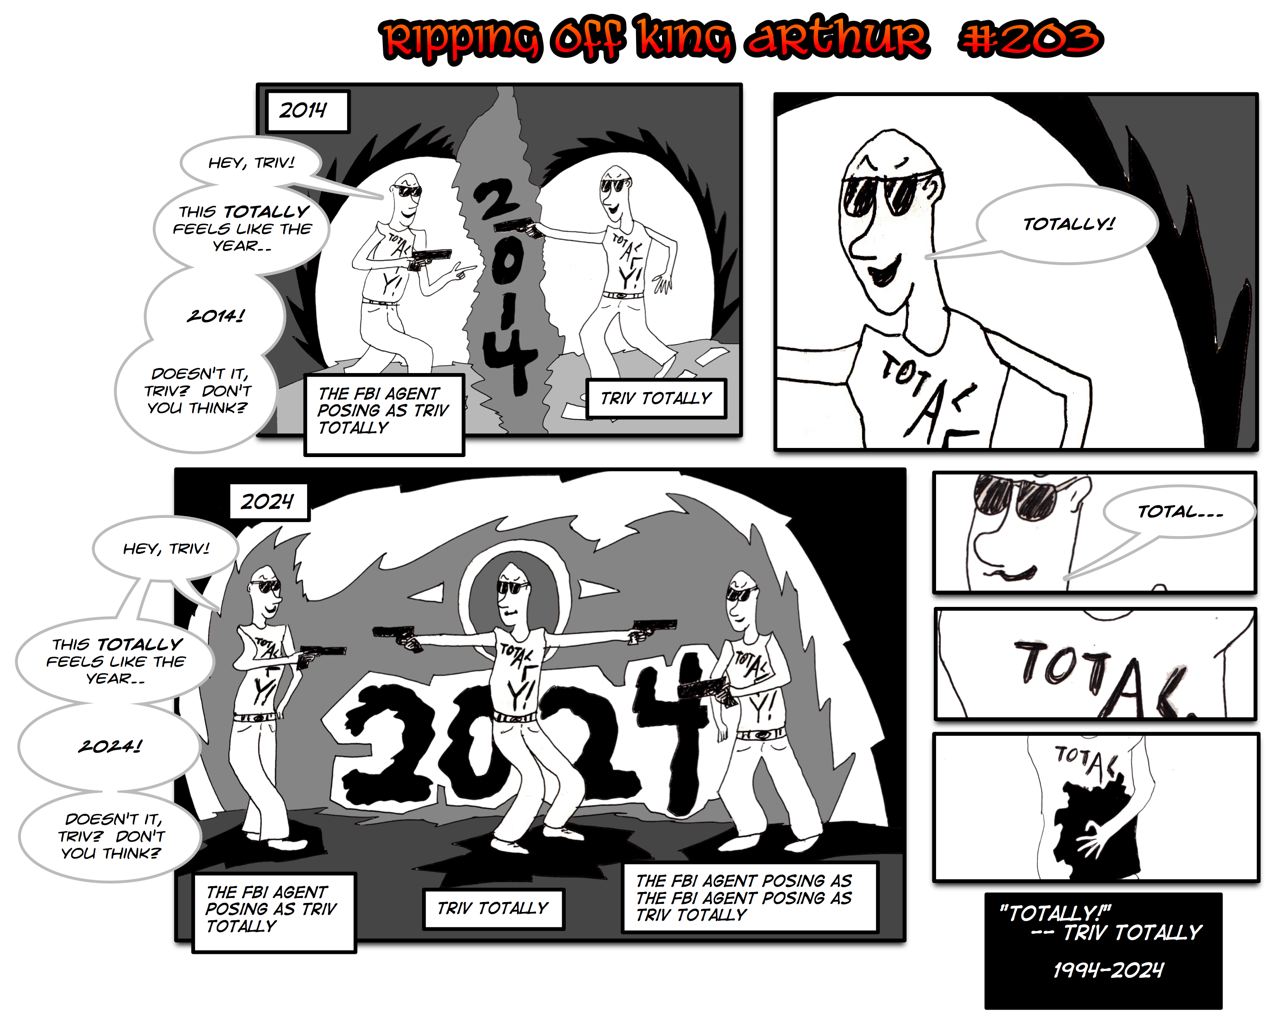 The first part of this strip is set in 2014.  The second half is set in 2024.